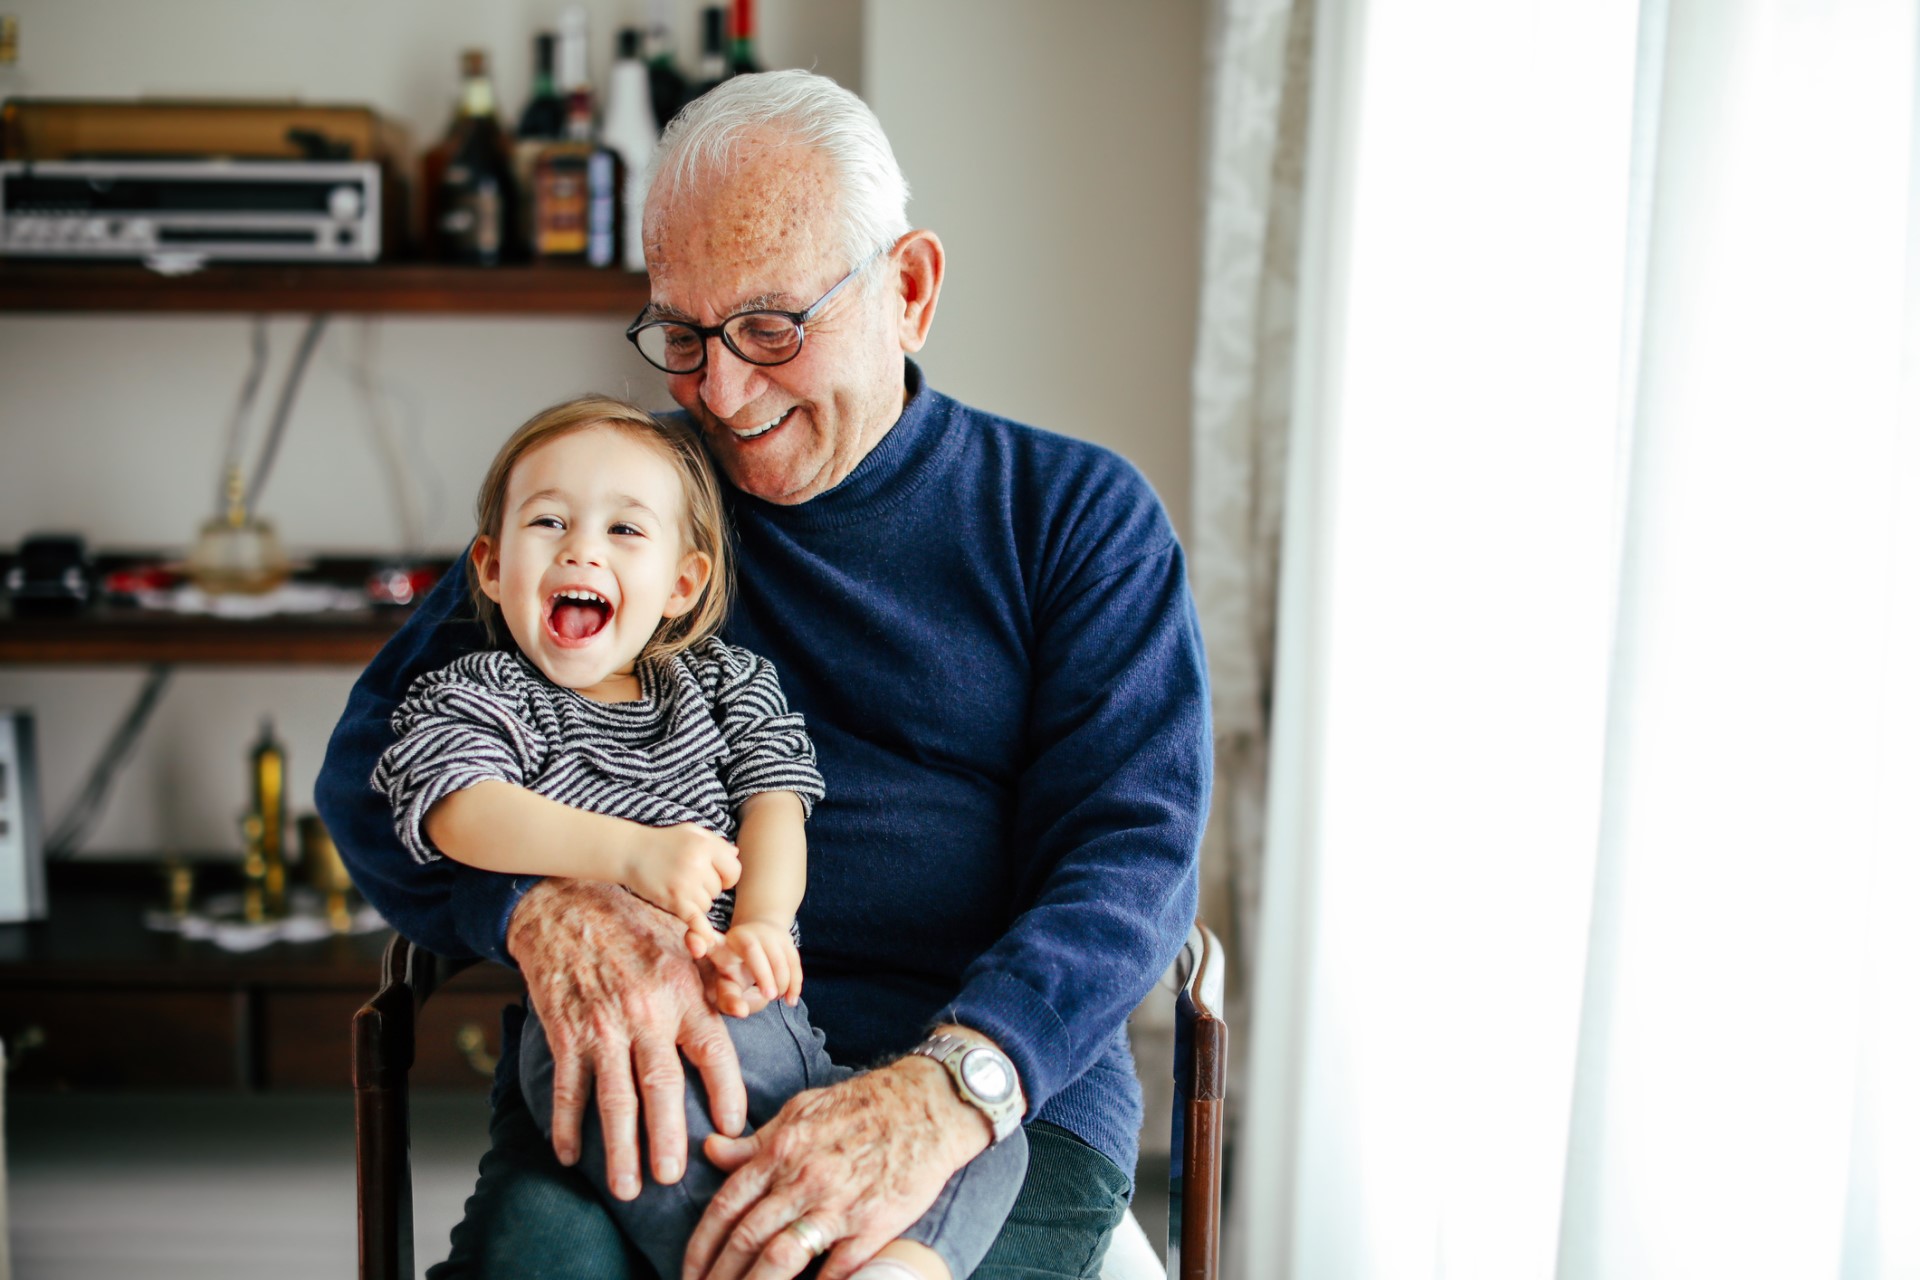 Grandfather smiling holding young grandchild who is laughing